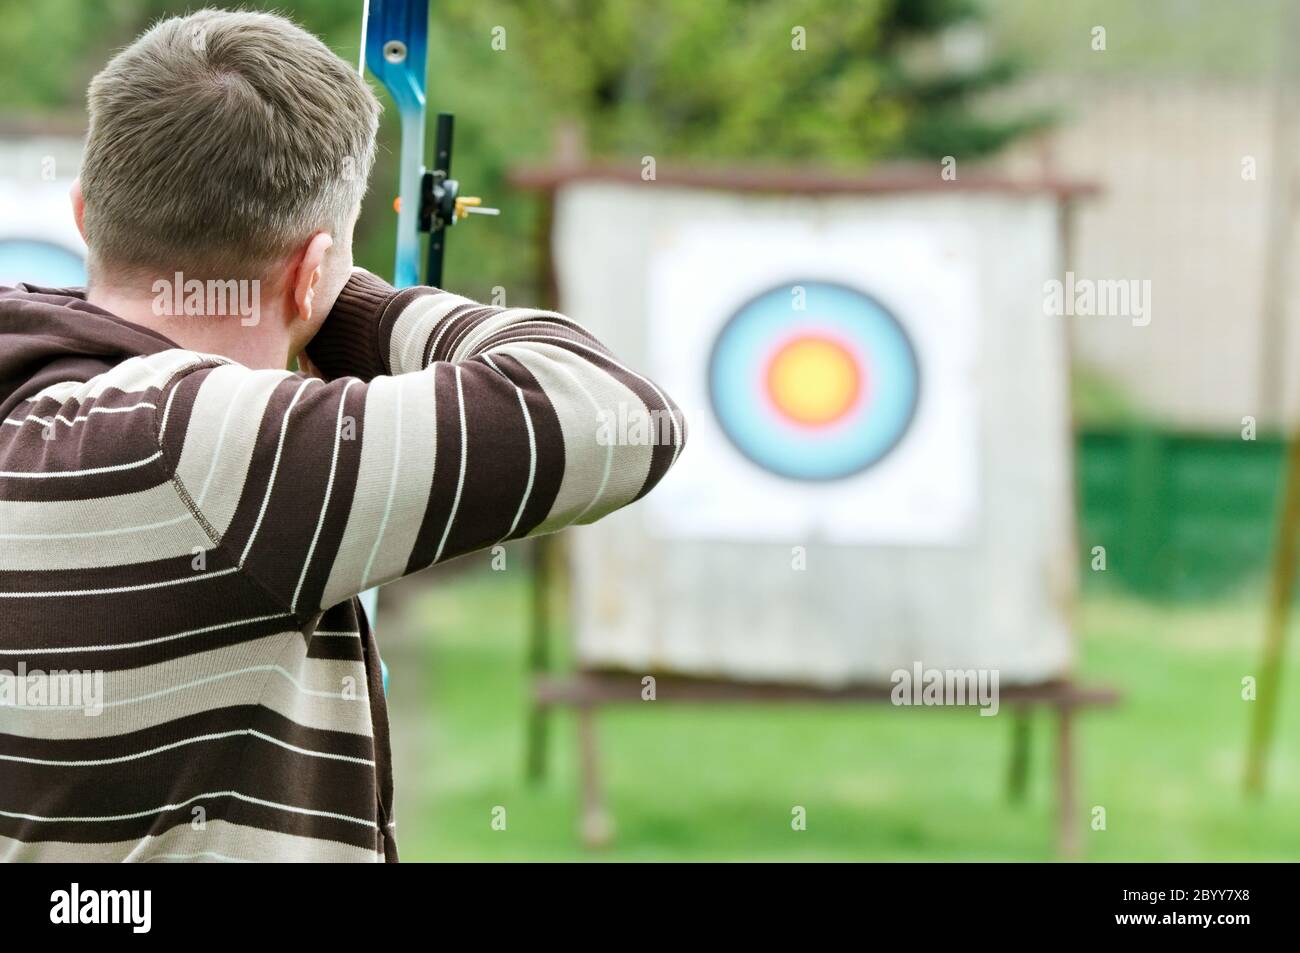 Archer aiming with bow Stock Photo